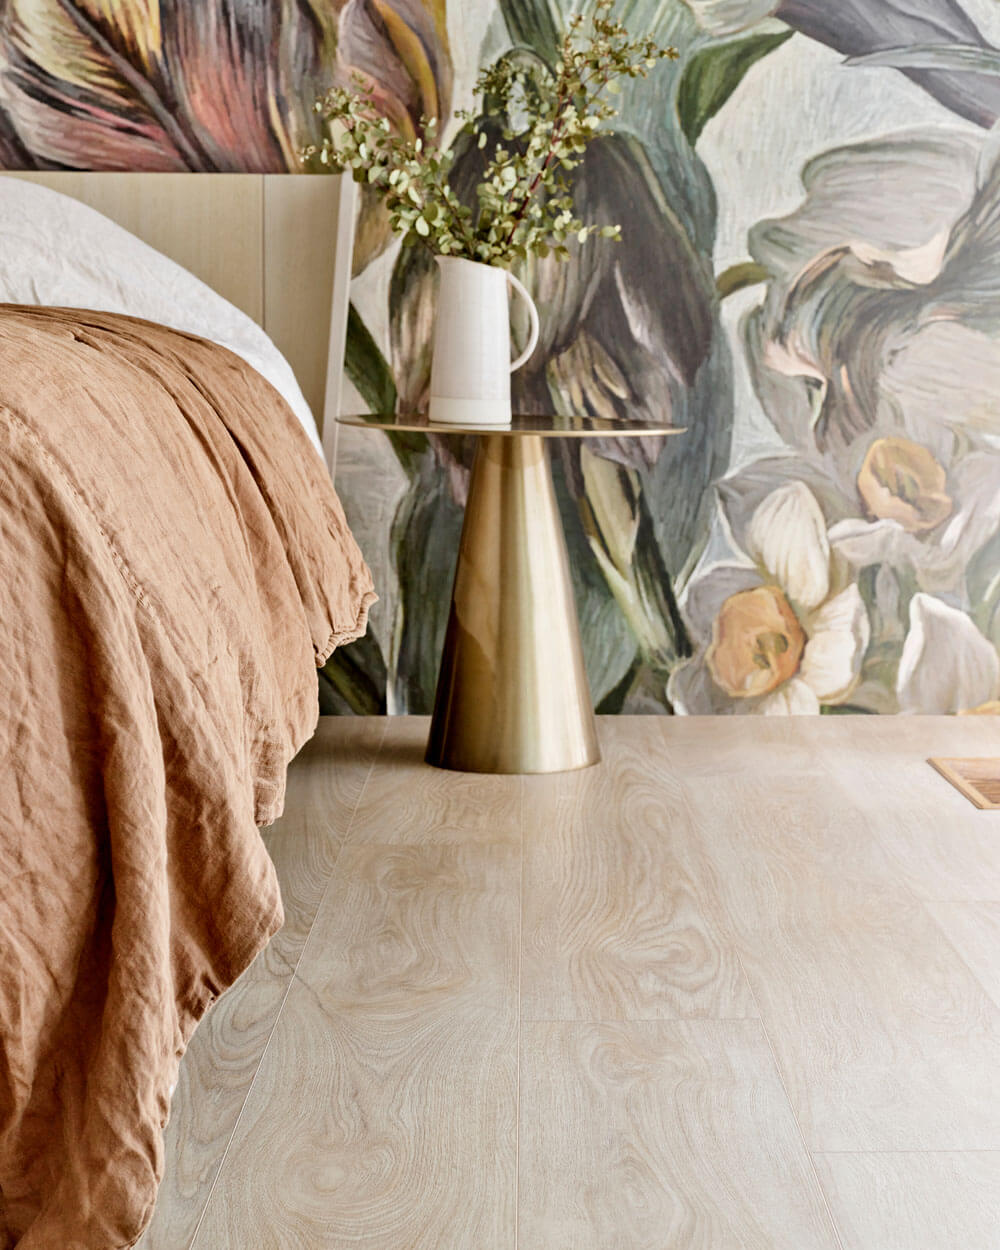 Interior of a bedroom with a bed against a wall with floral wallpaper. The floor shown is Moduleo LayRed Laurel Oak 51230 Embossed luxury vinyl flooring.